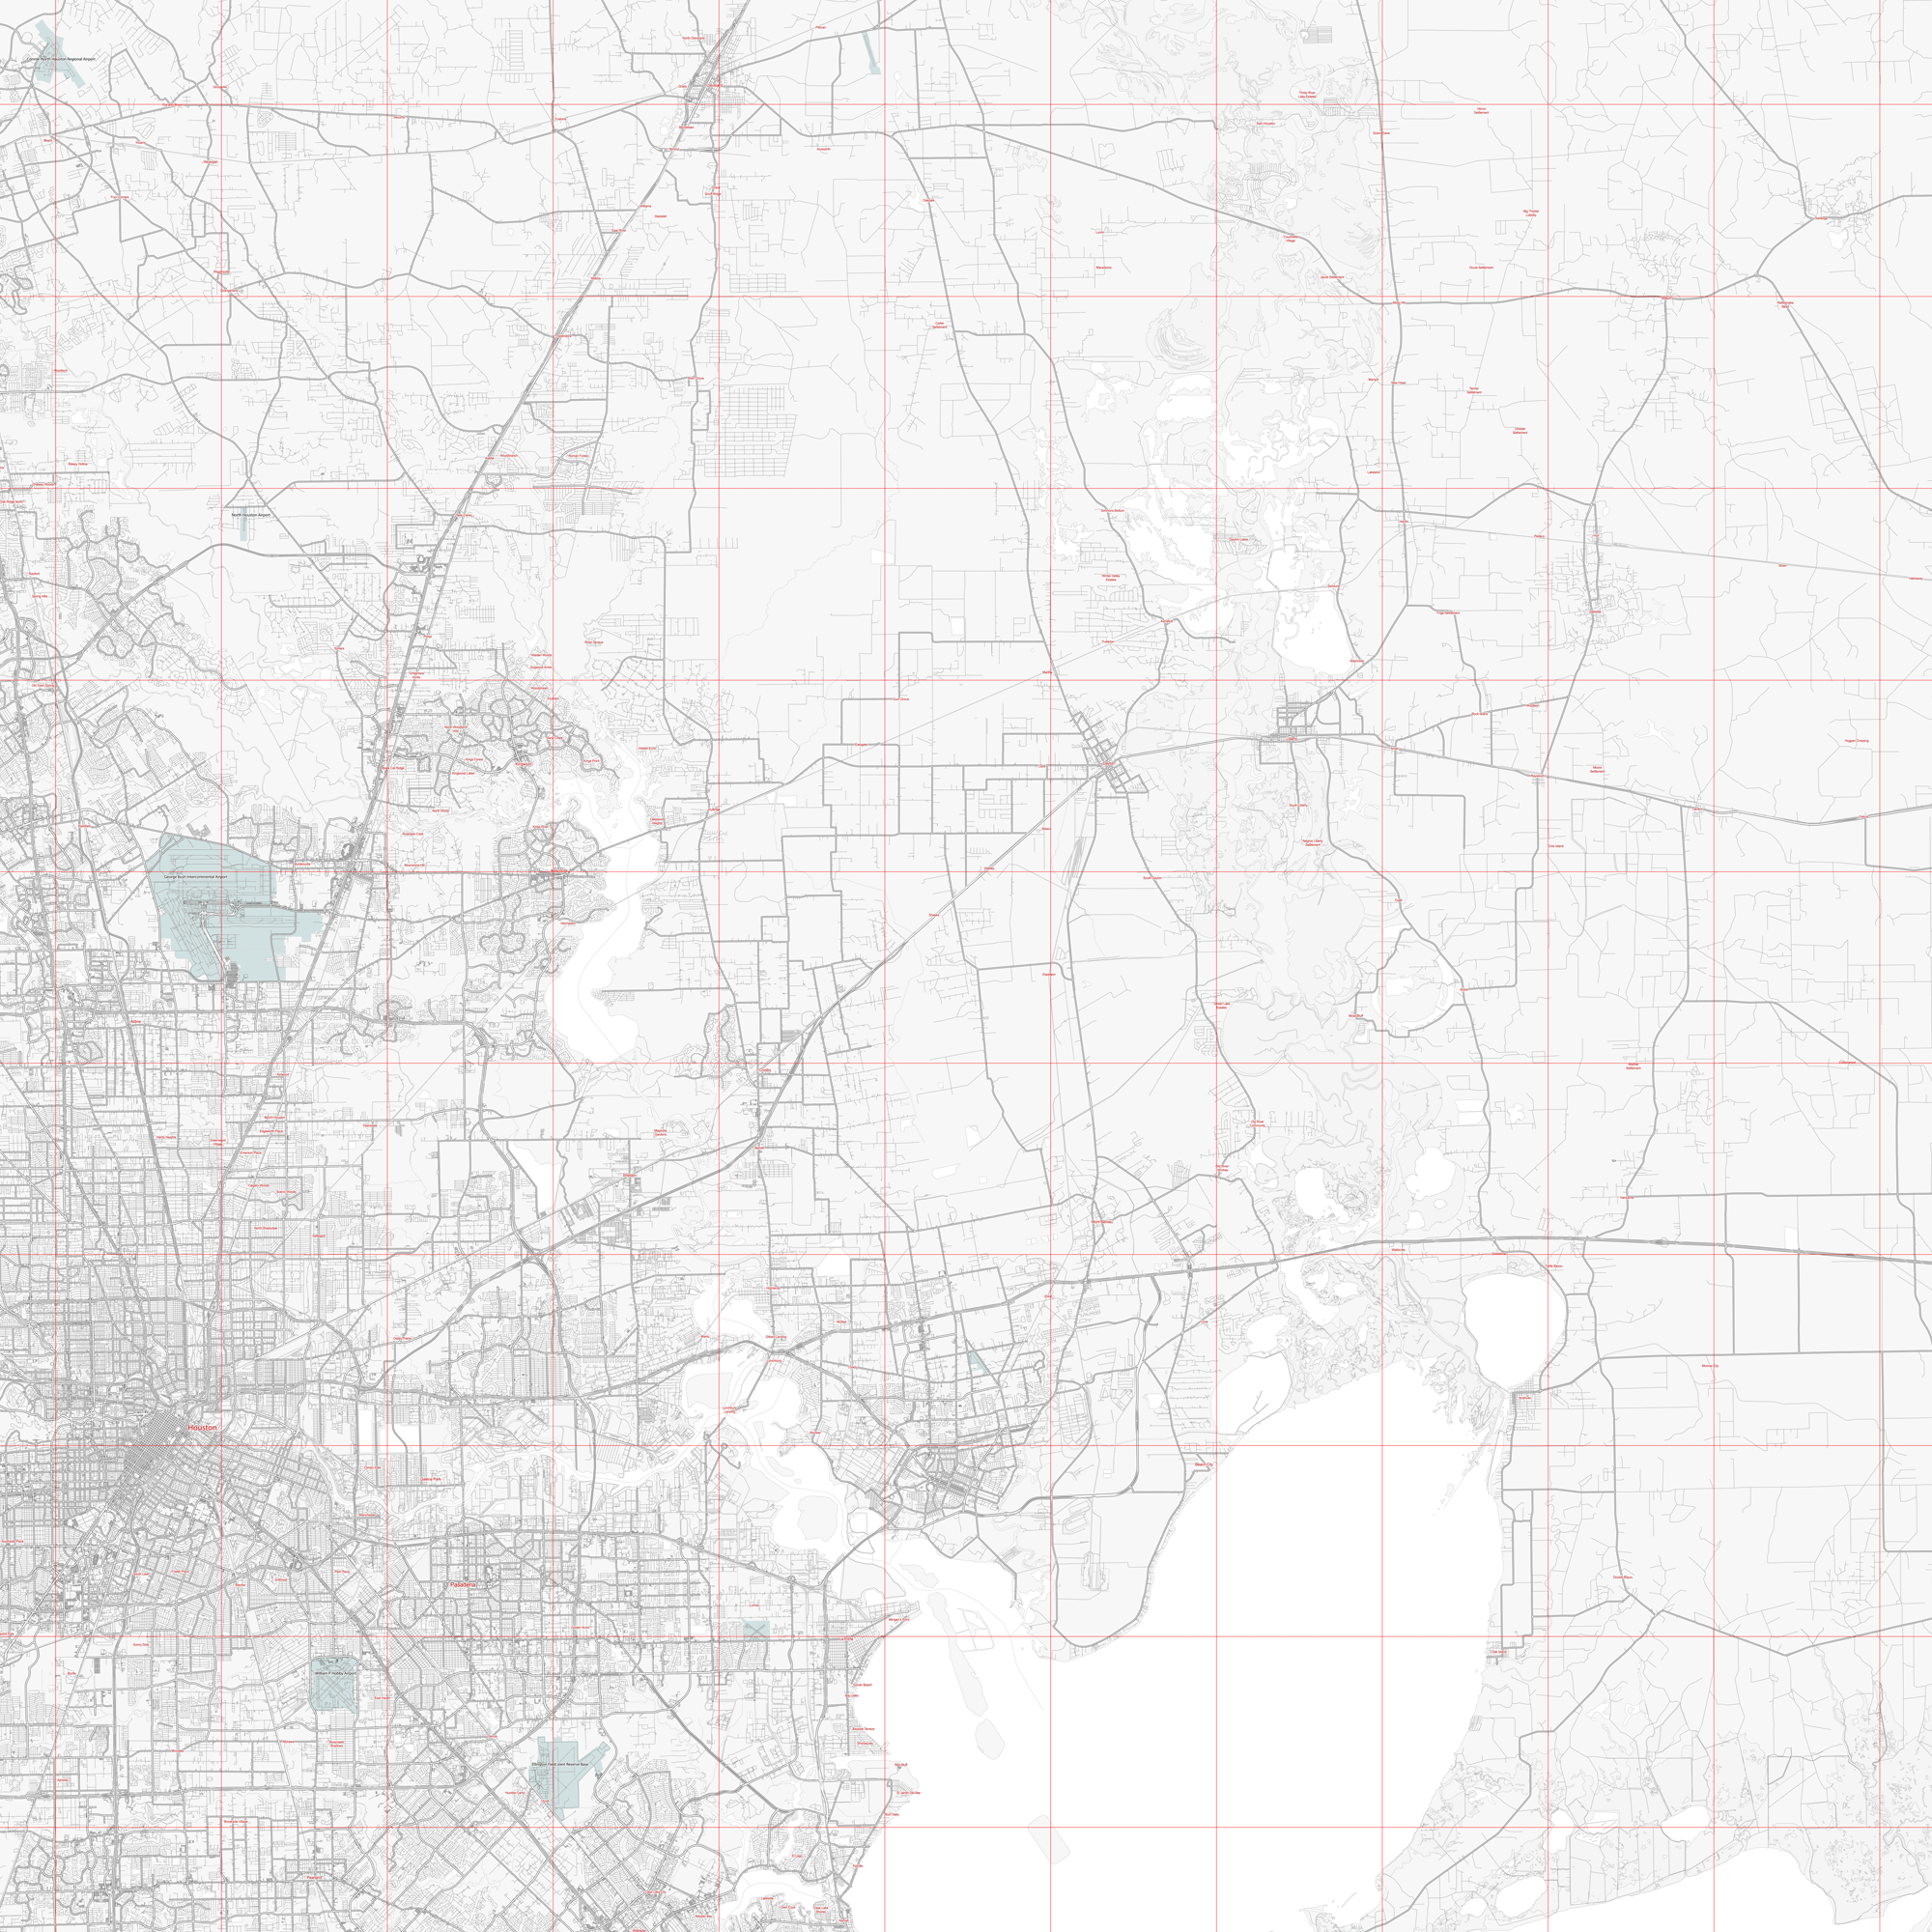 Houston Texas US PDF Vector Map: City Plan Low Detailed (simple white) Street Map editable Adobe PDF in layers